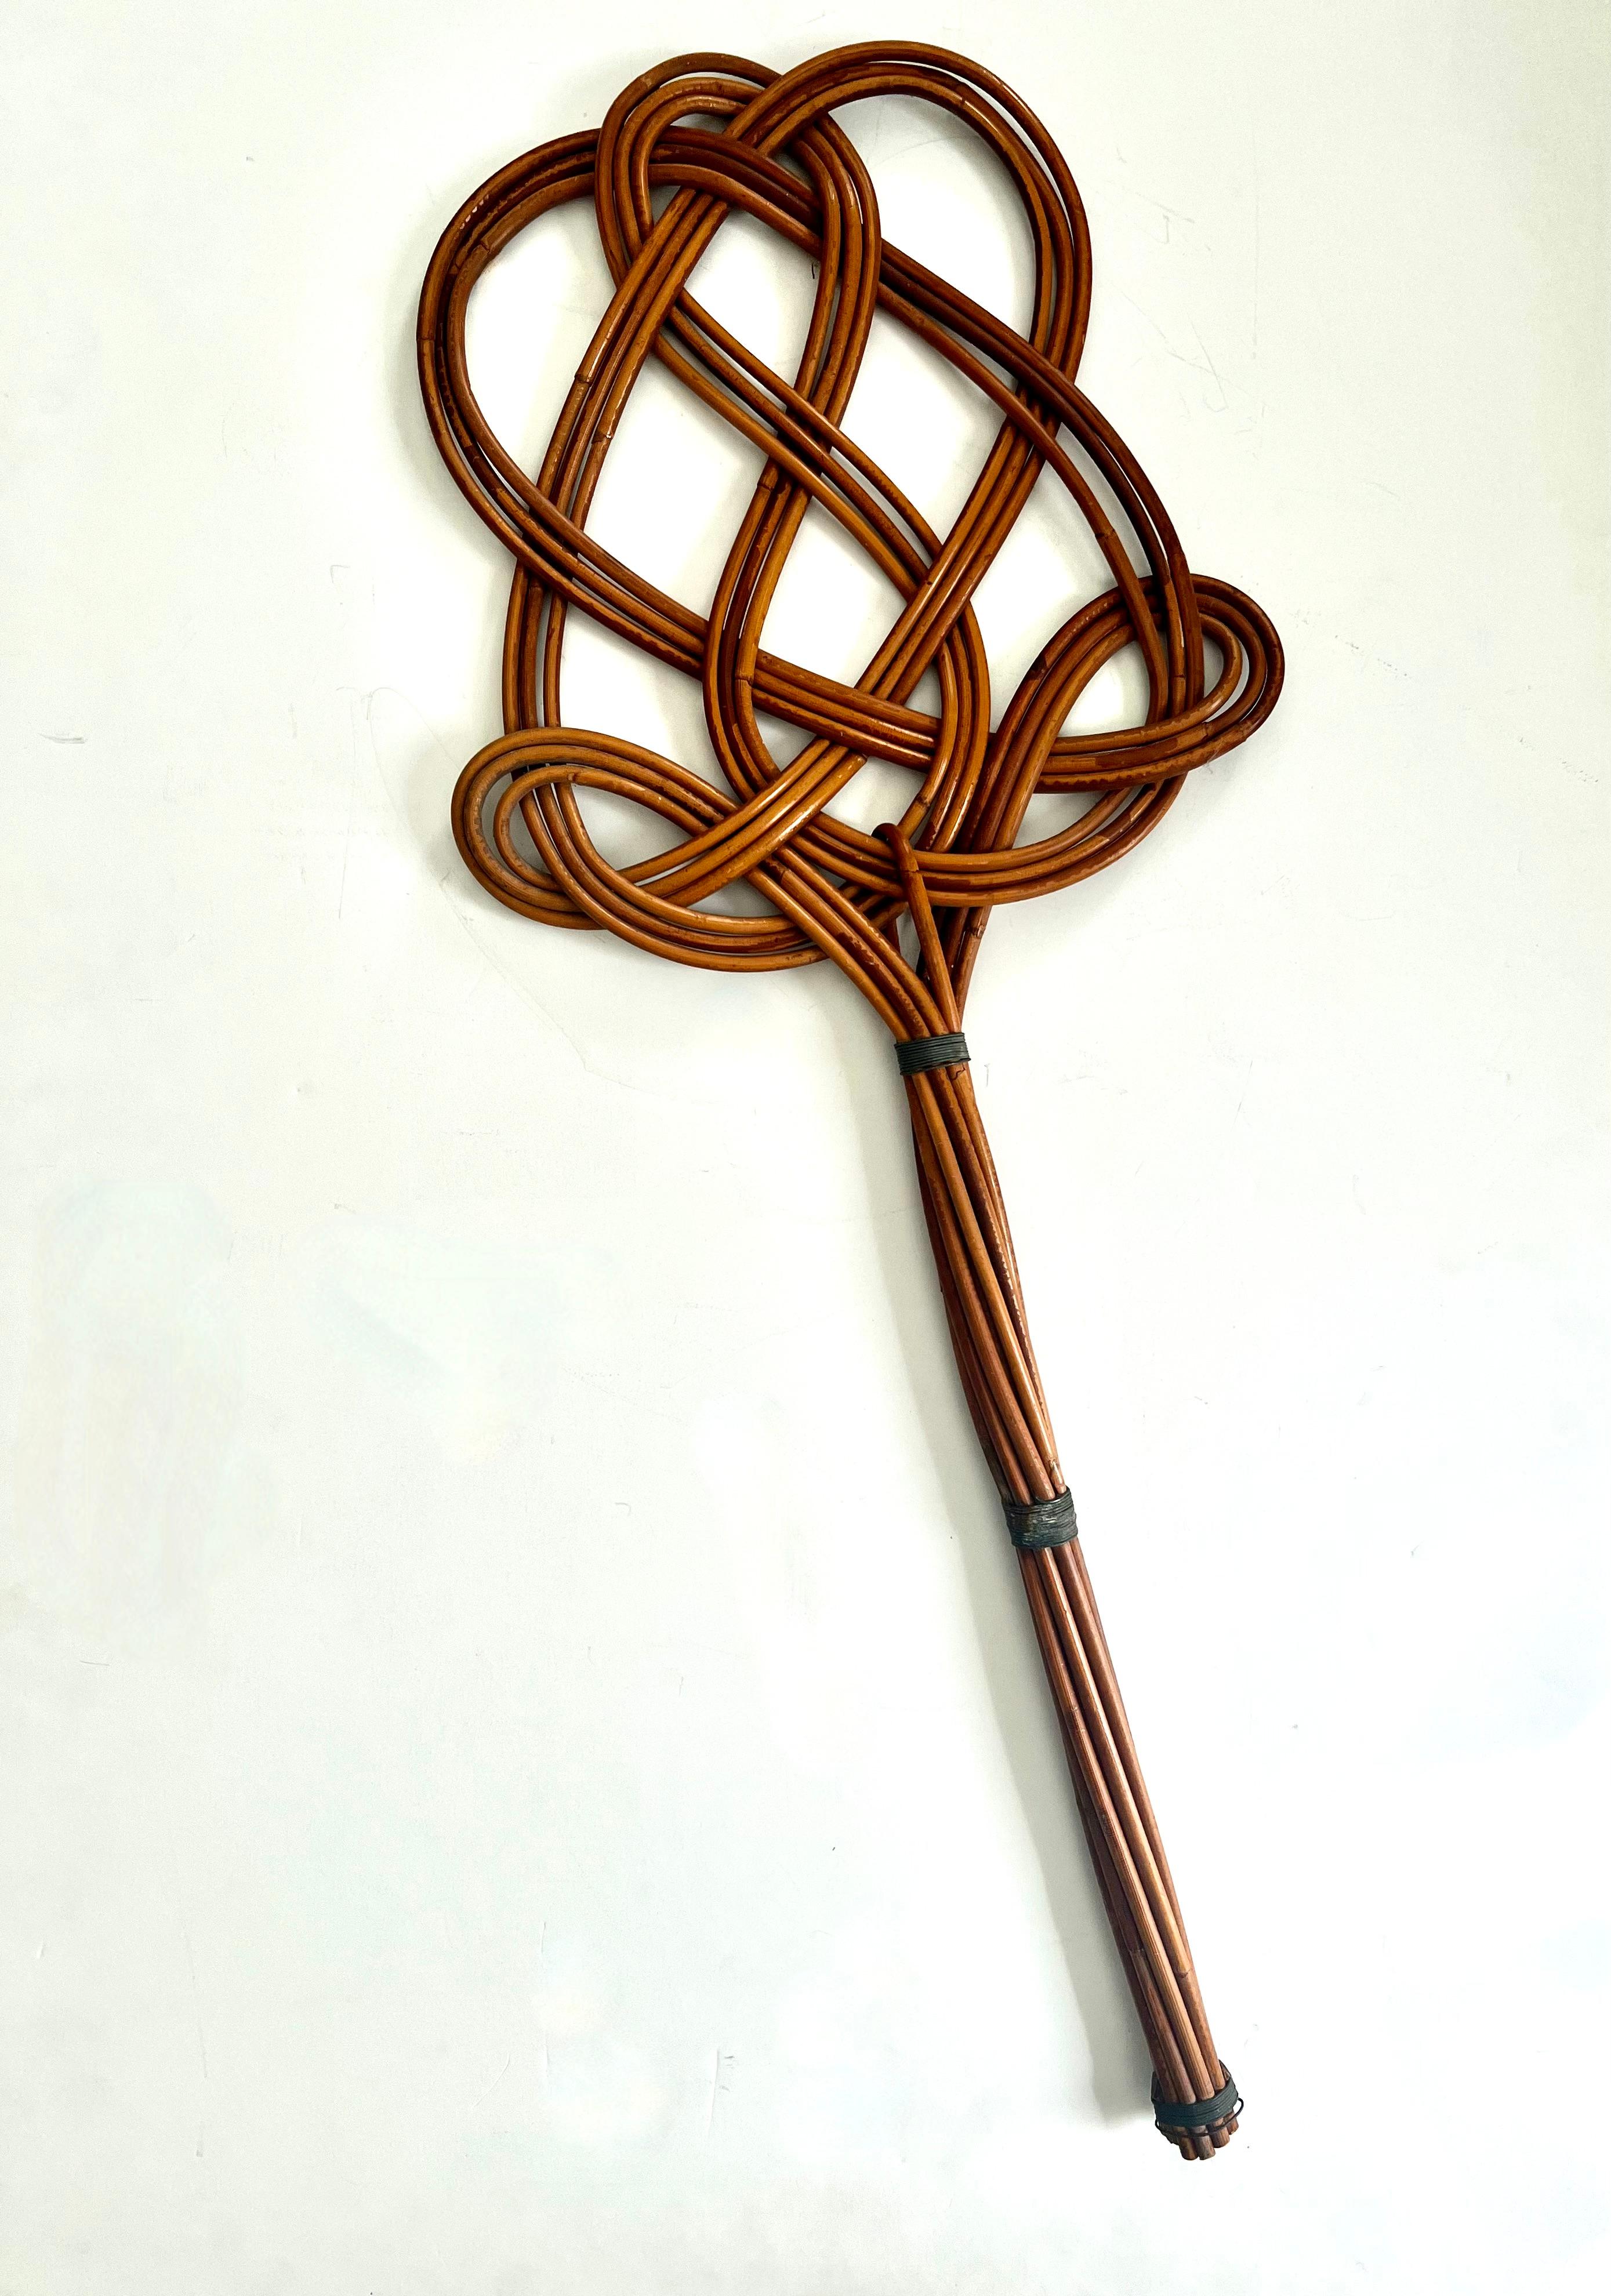 A hand made, hand woven Rattan Rug Beater... While fully functional and stable, this piece is also very decorative.

Could be used as placement on a wall with a story, on a console or simply leaning on the wall.